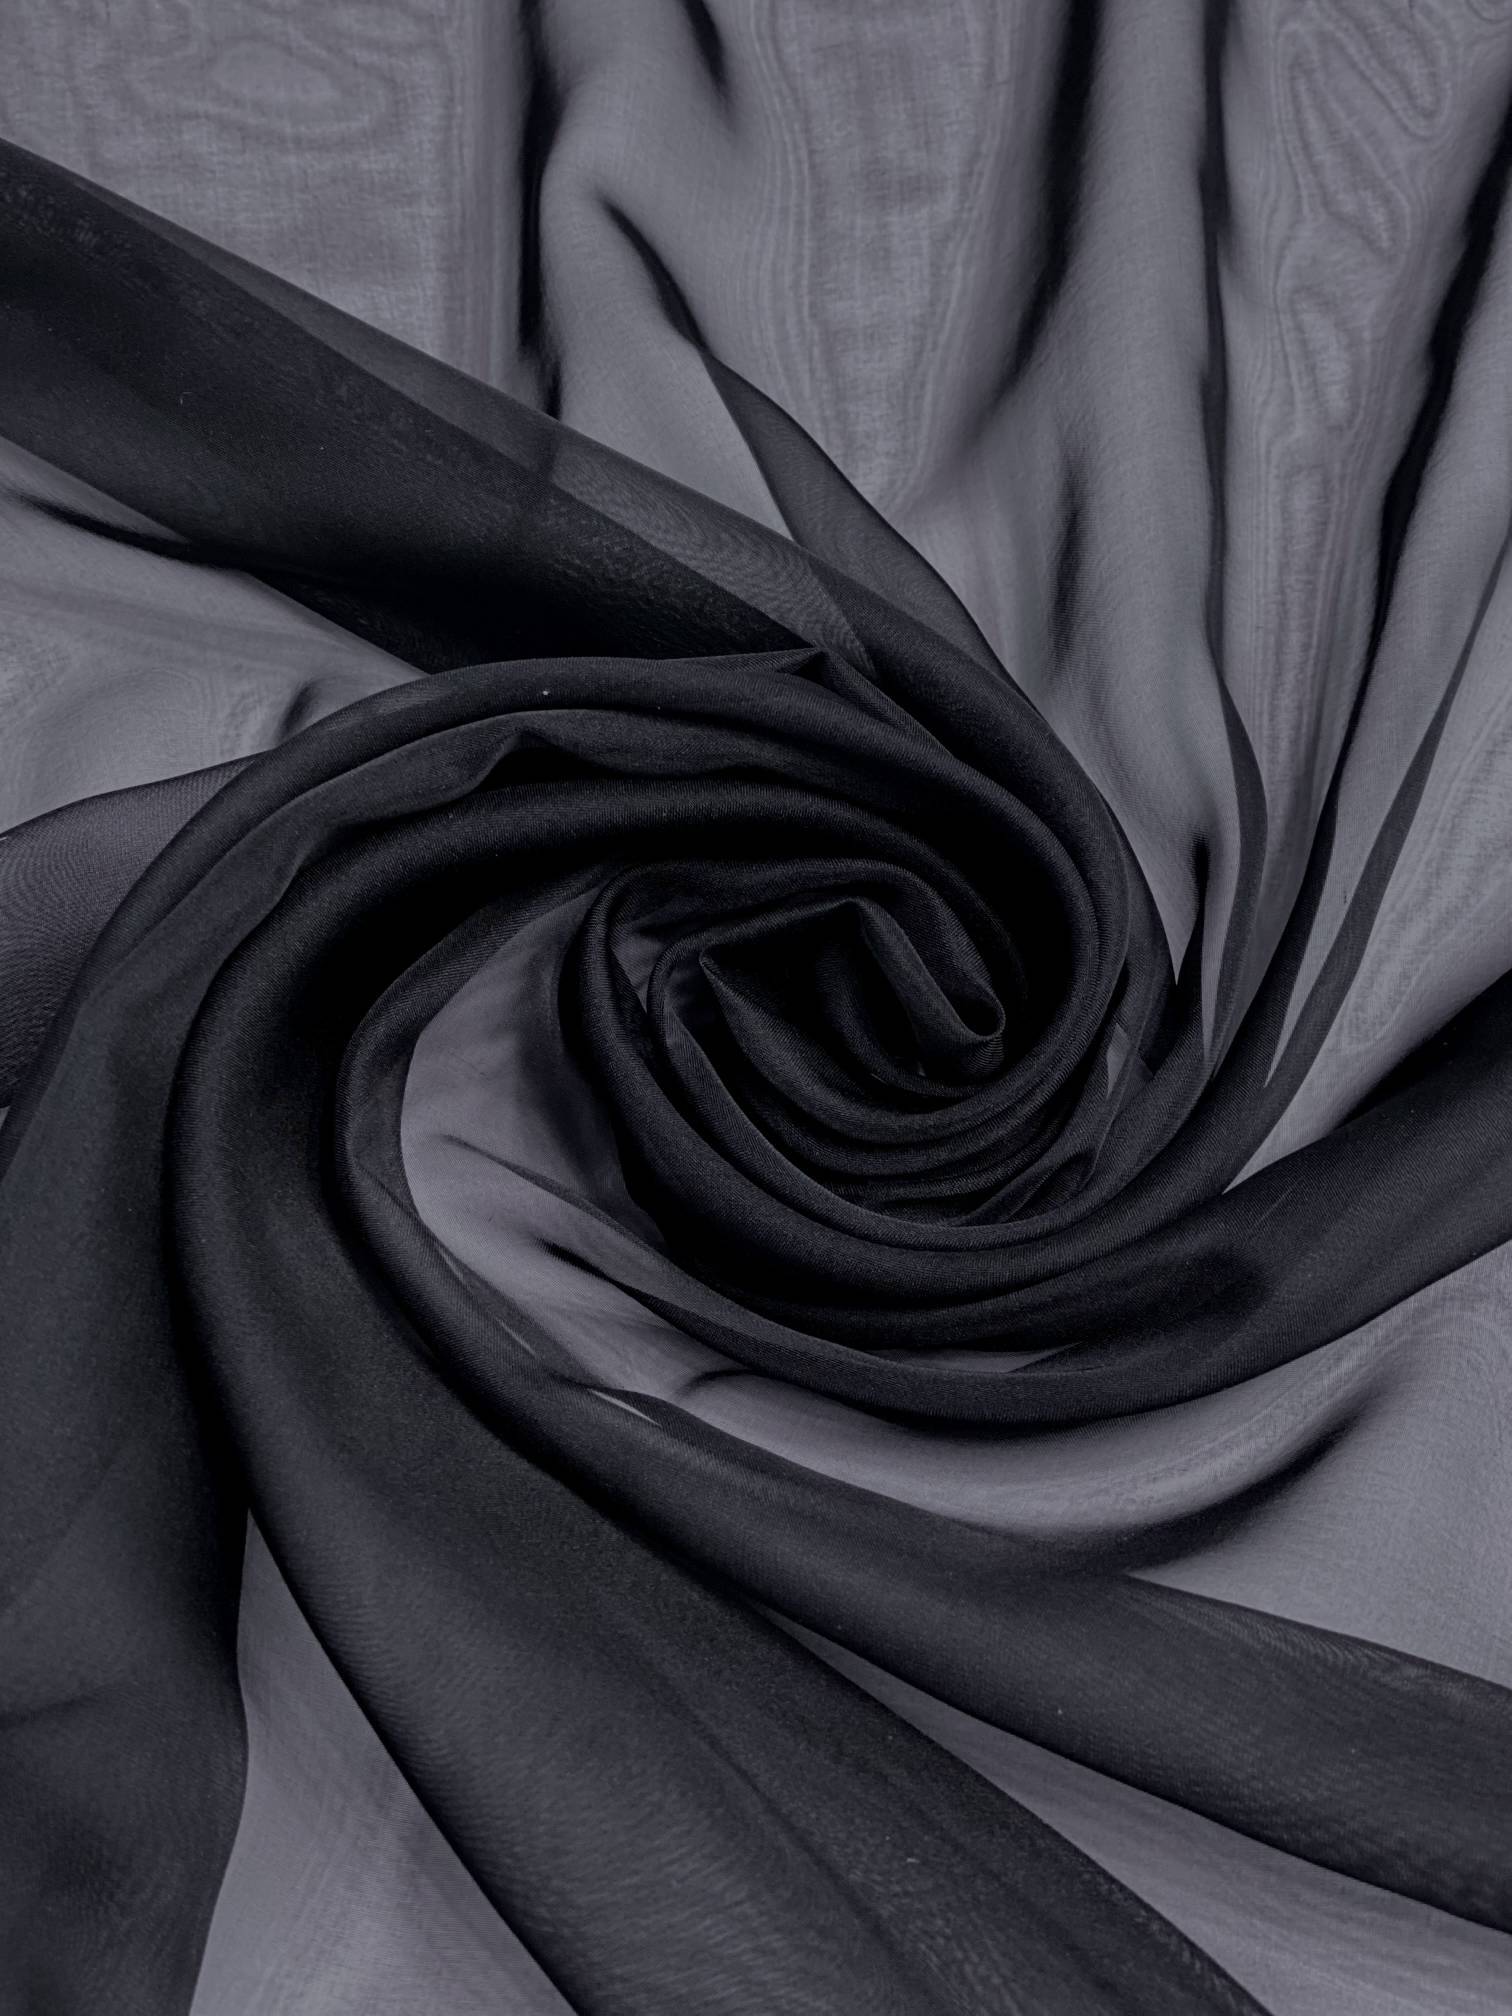 Mustered Black Iridescent 100% Silk Taffeta Fabric 54” Width Sold By The  Yard 